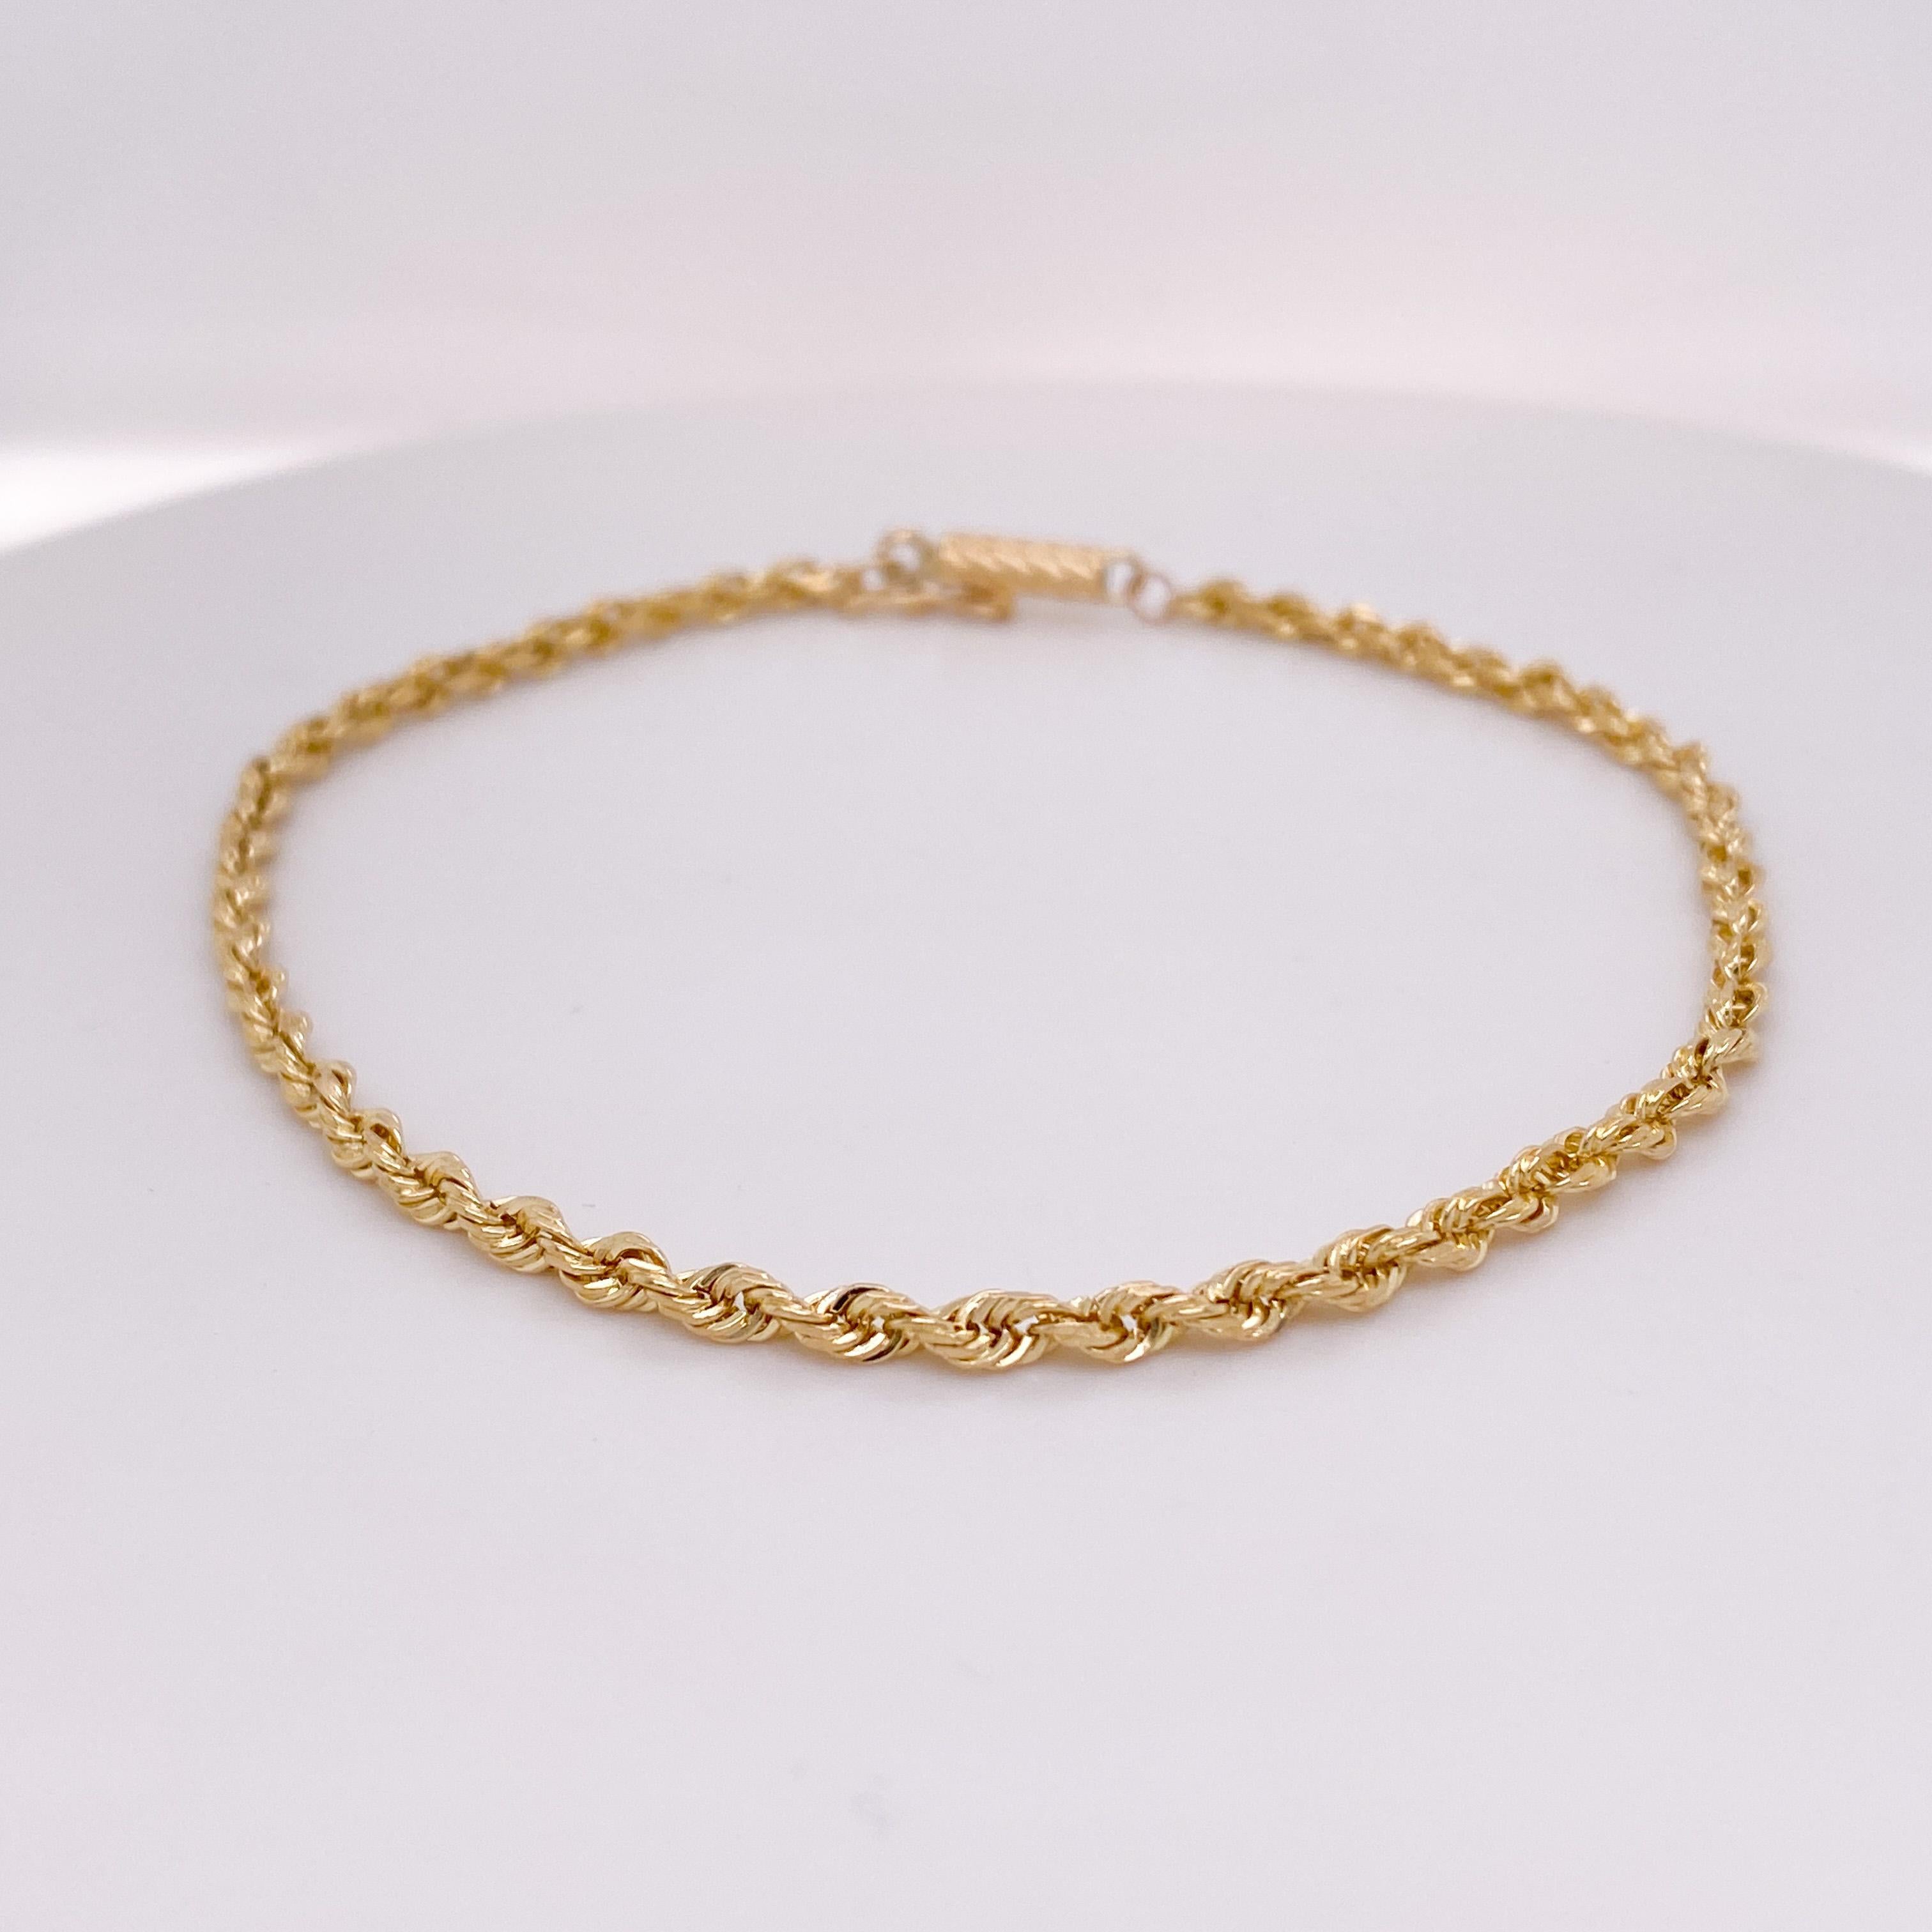 This 14 karat yellow gold bracelet is the PERFECT addition to any jewelry lover's collection. The rope chain is a timeless design that will complement any look. This bracelet can be paired with watches, bangles, bracelets or worn alone to showcase